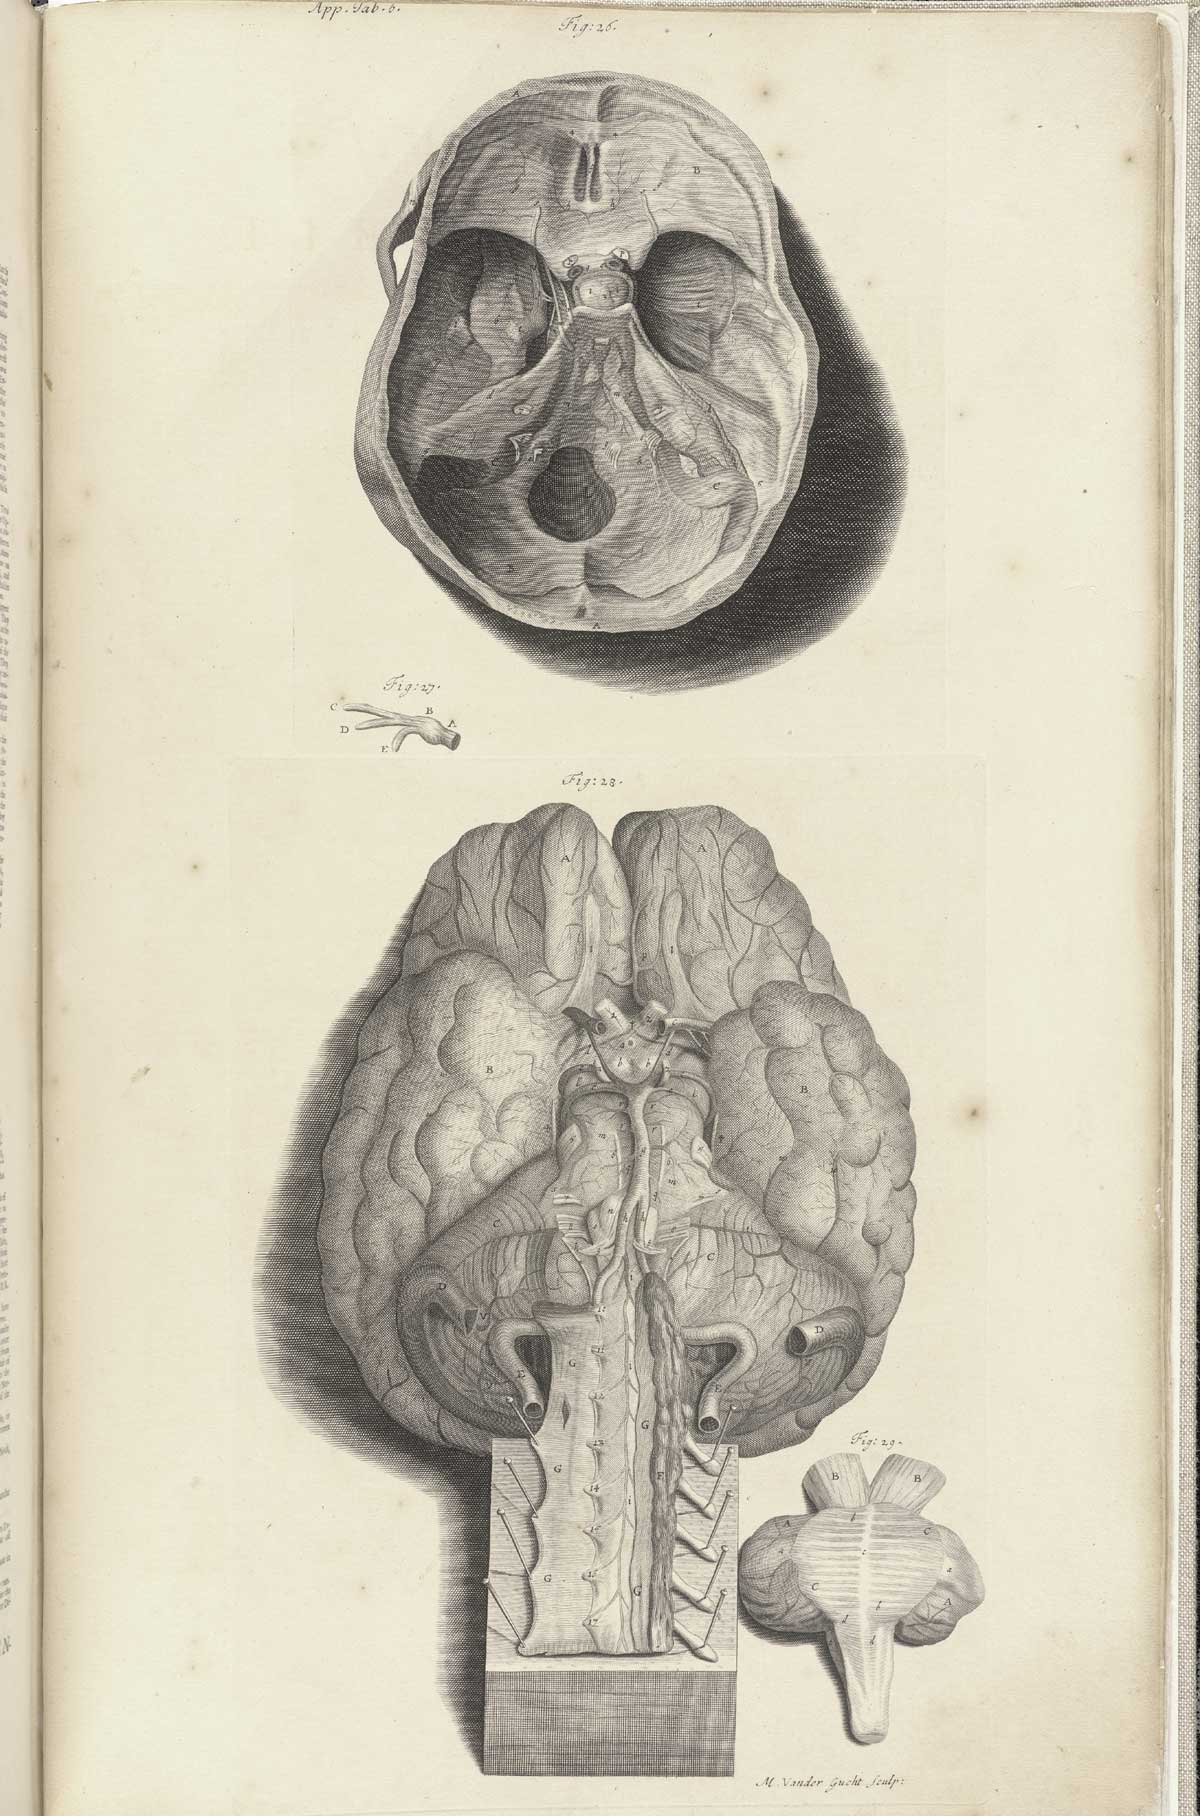 Engraving of the interior of the bottom of the skull showing the foramen magnum at the top of the page, with the brain at the bottom of the page viewed from below with the spinal cord extending down, pinned down to a board, and with a part of the cerebellum sitting to the bottom right; from William Cowper’s Anatomy of the humane bodies, NLM Call no.: WZ 250 C876a 1698.